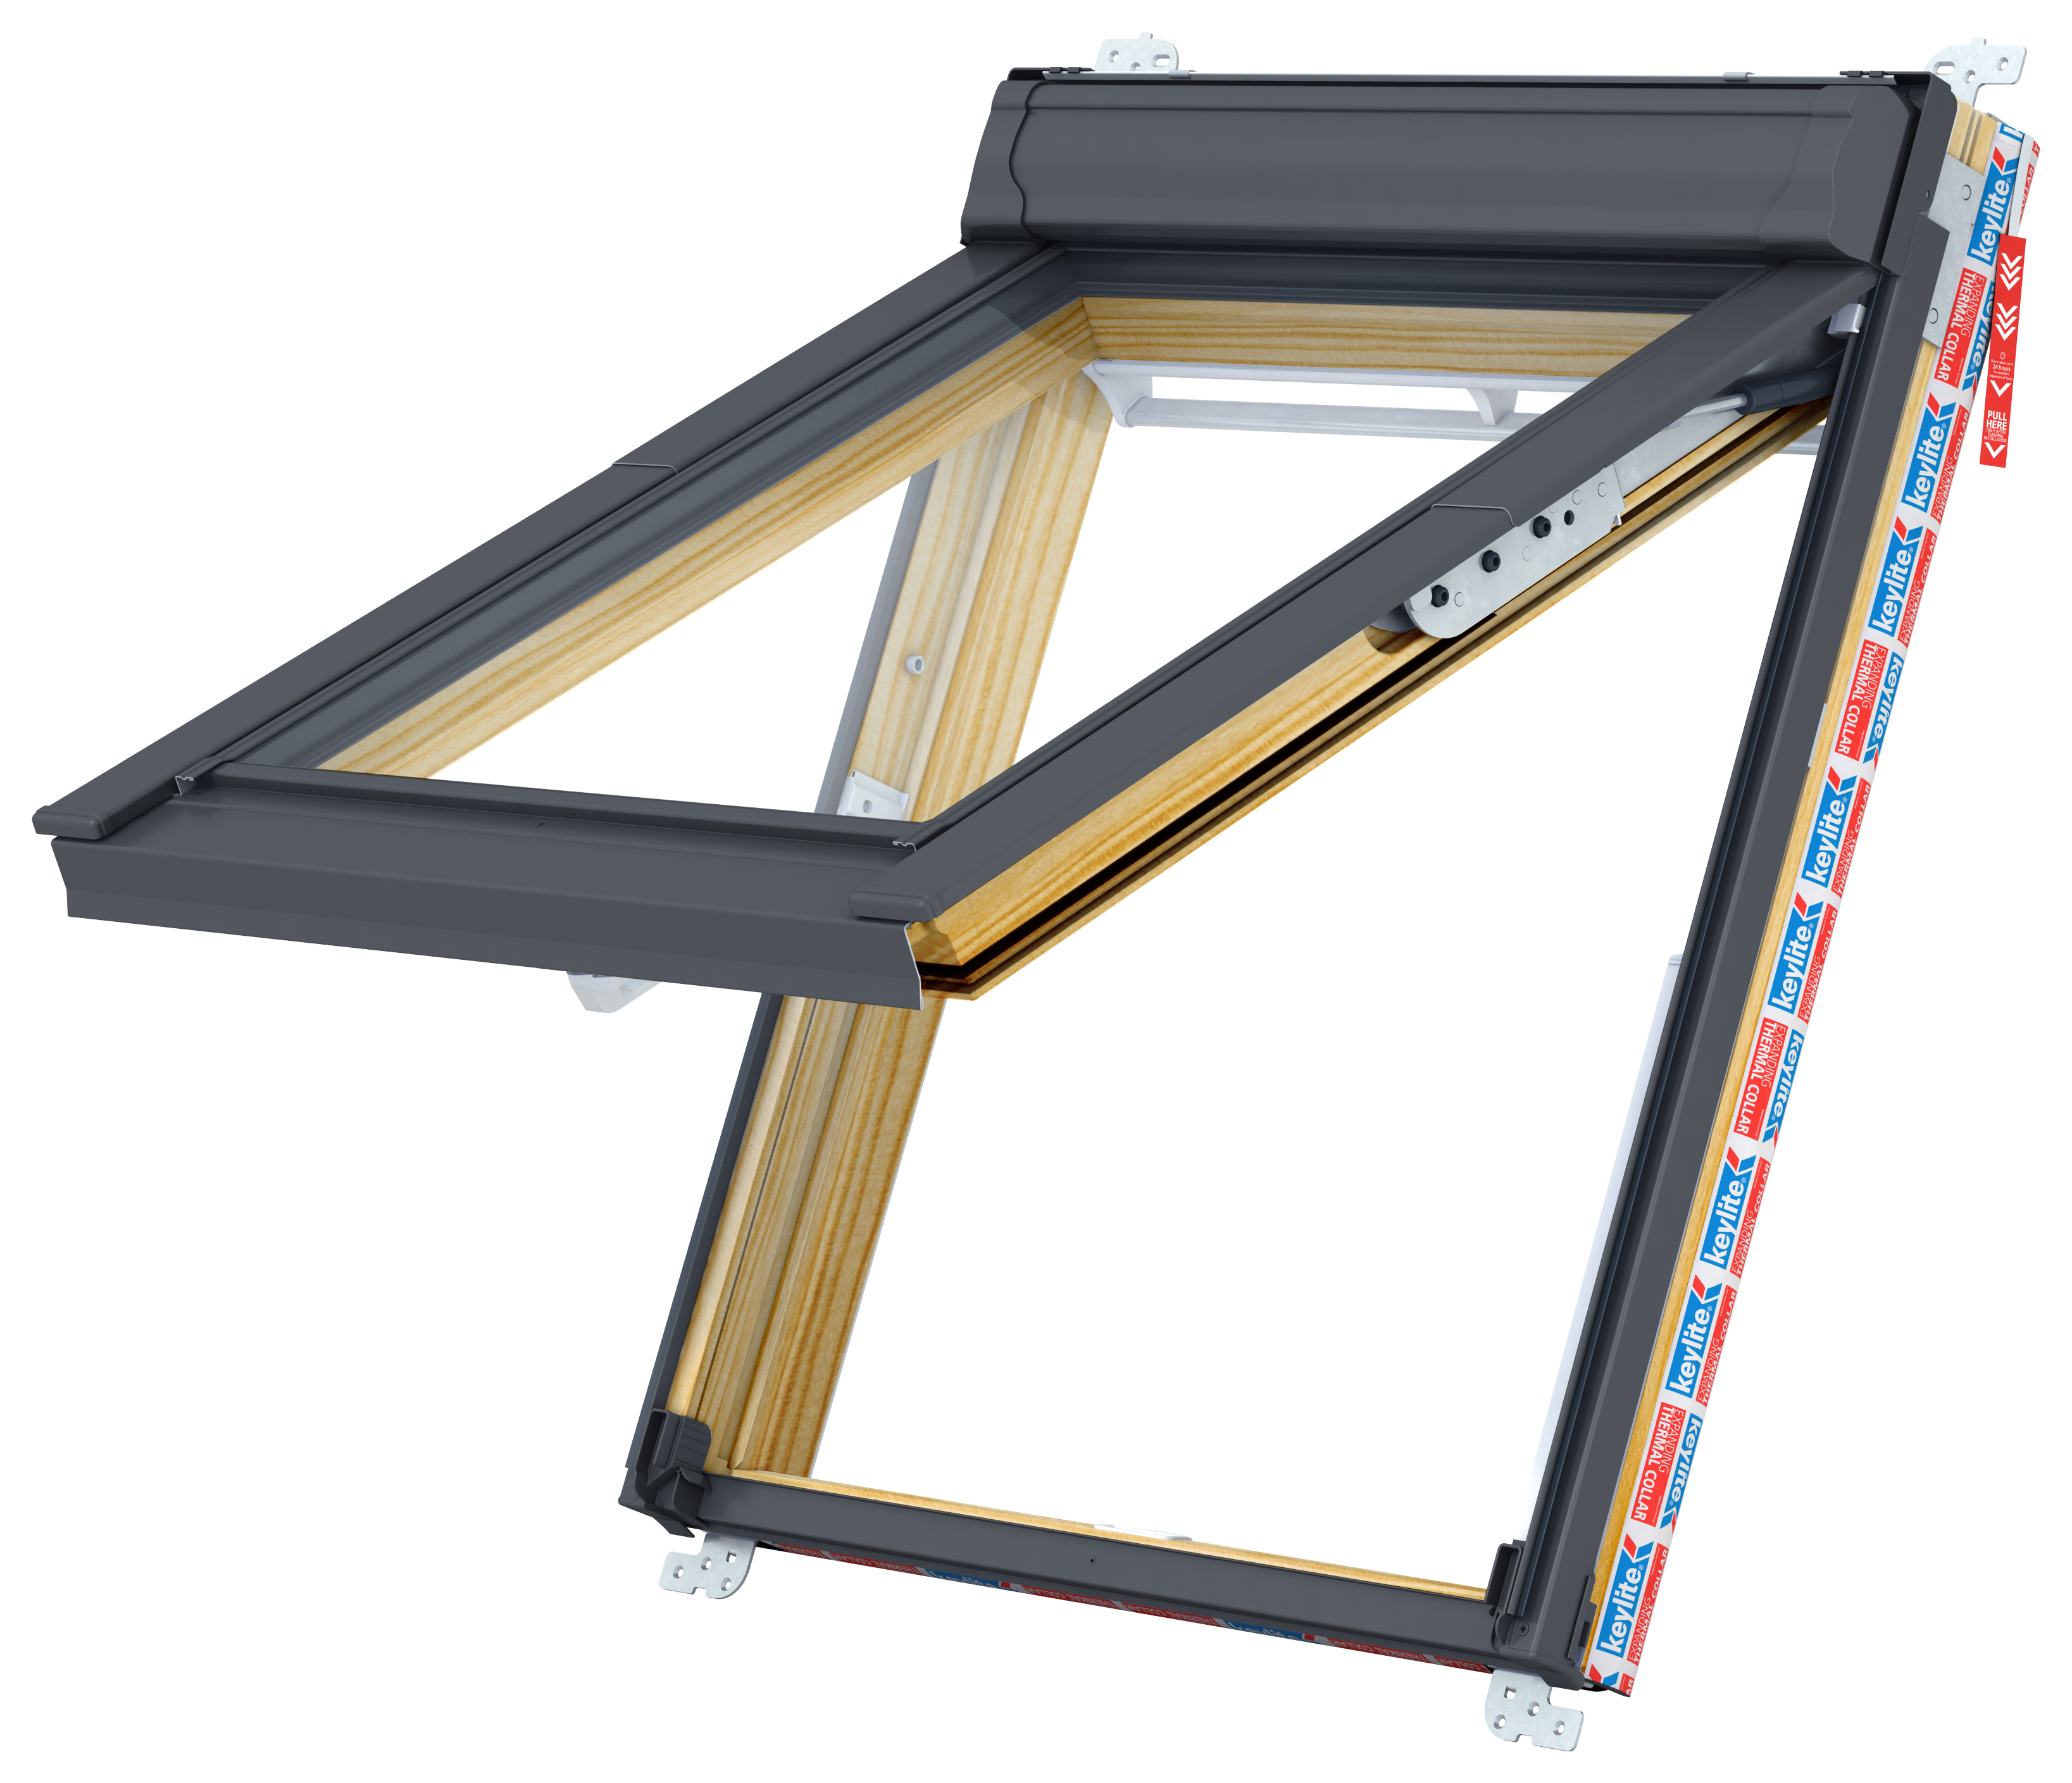 Image of Keylite TFE 04 HT Pine Fire Escape Hi-Therm Roof Window - 780 x 980mm